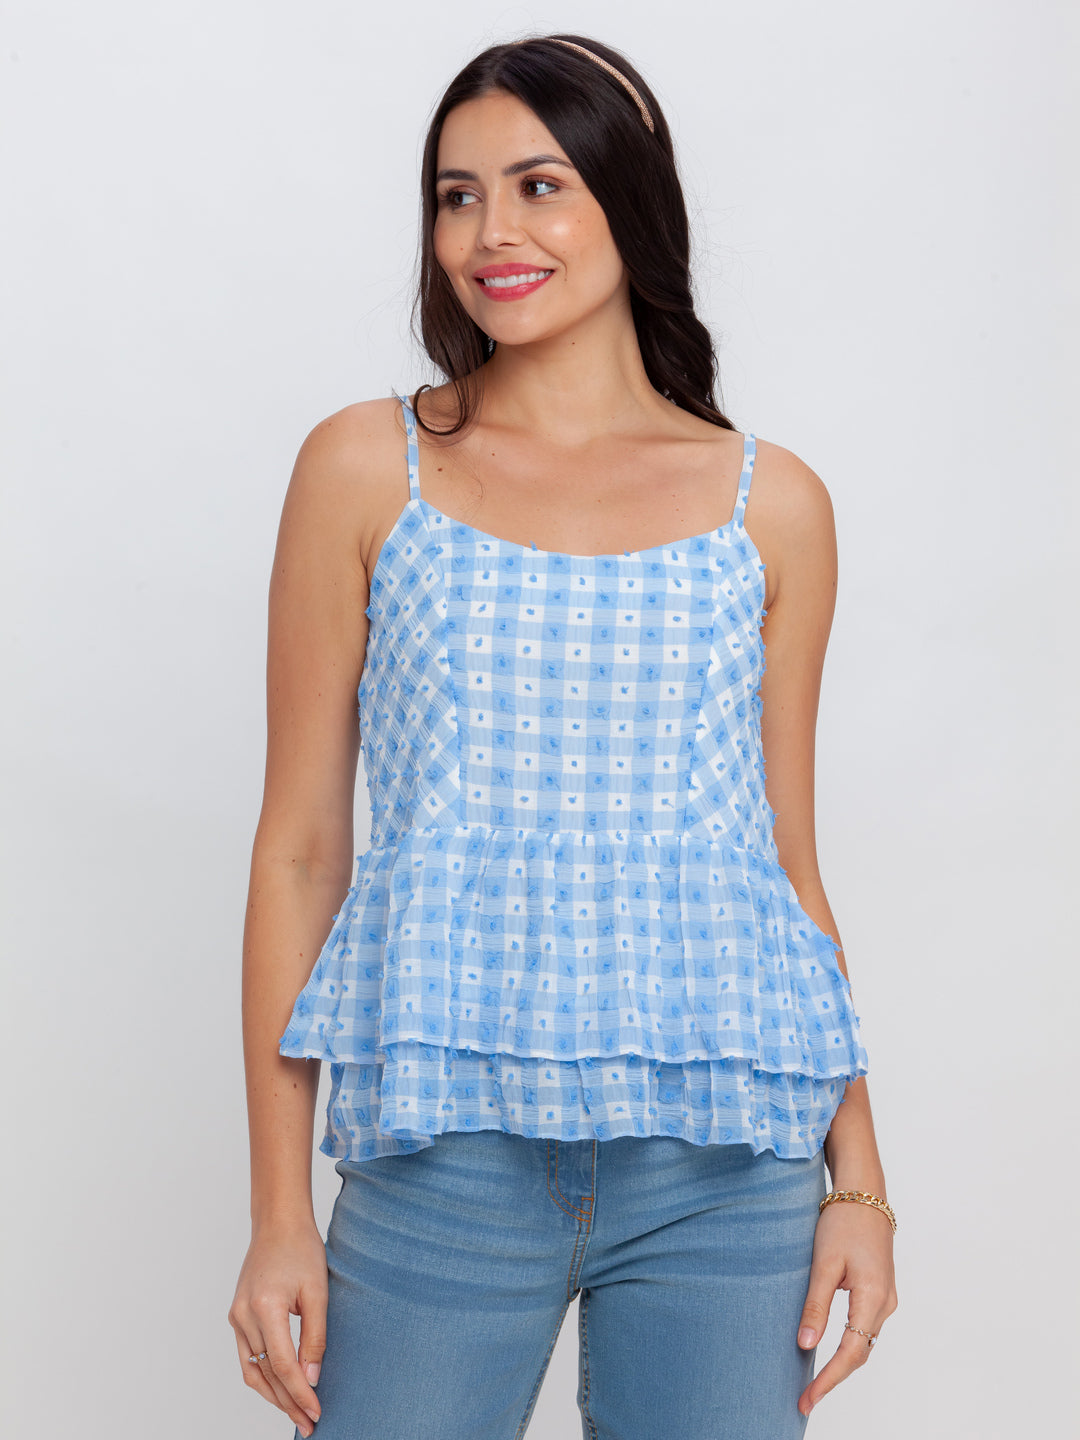 Blue Printed Strappy Top For Women